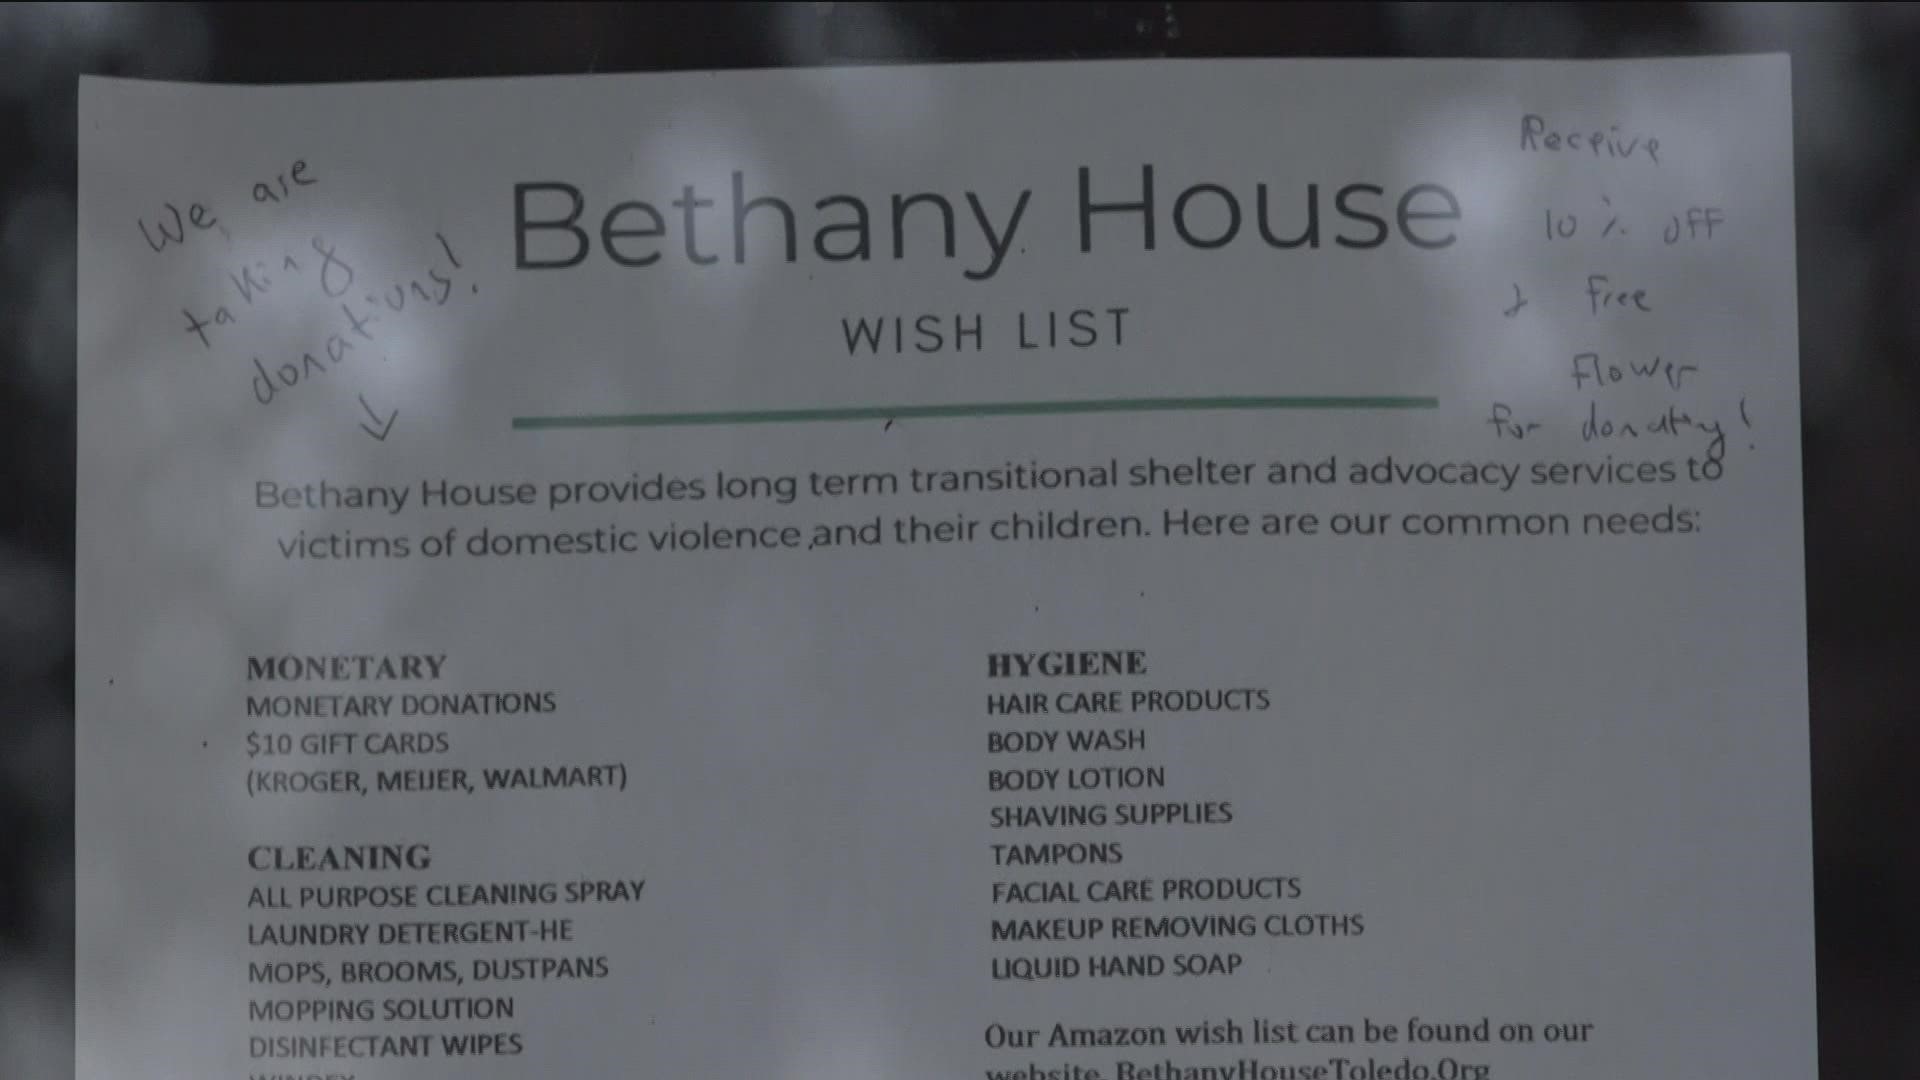 Rossford's Ella Flora is collecting goods for Bethany House.